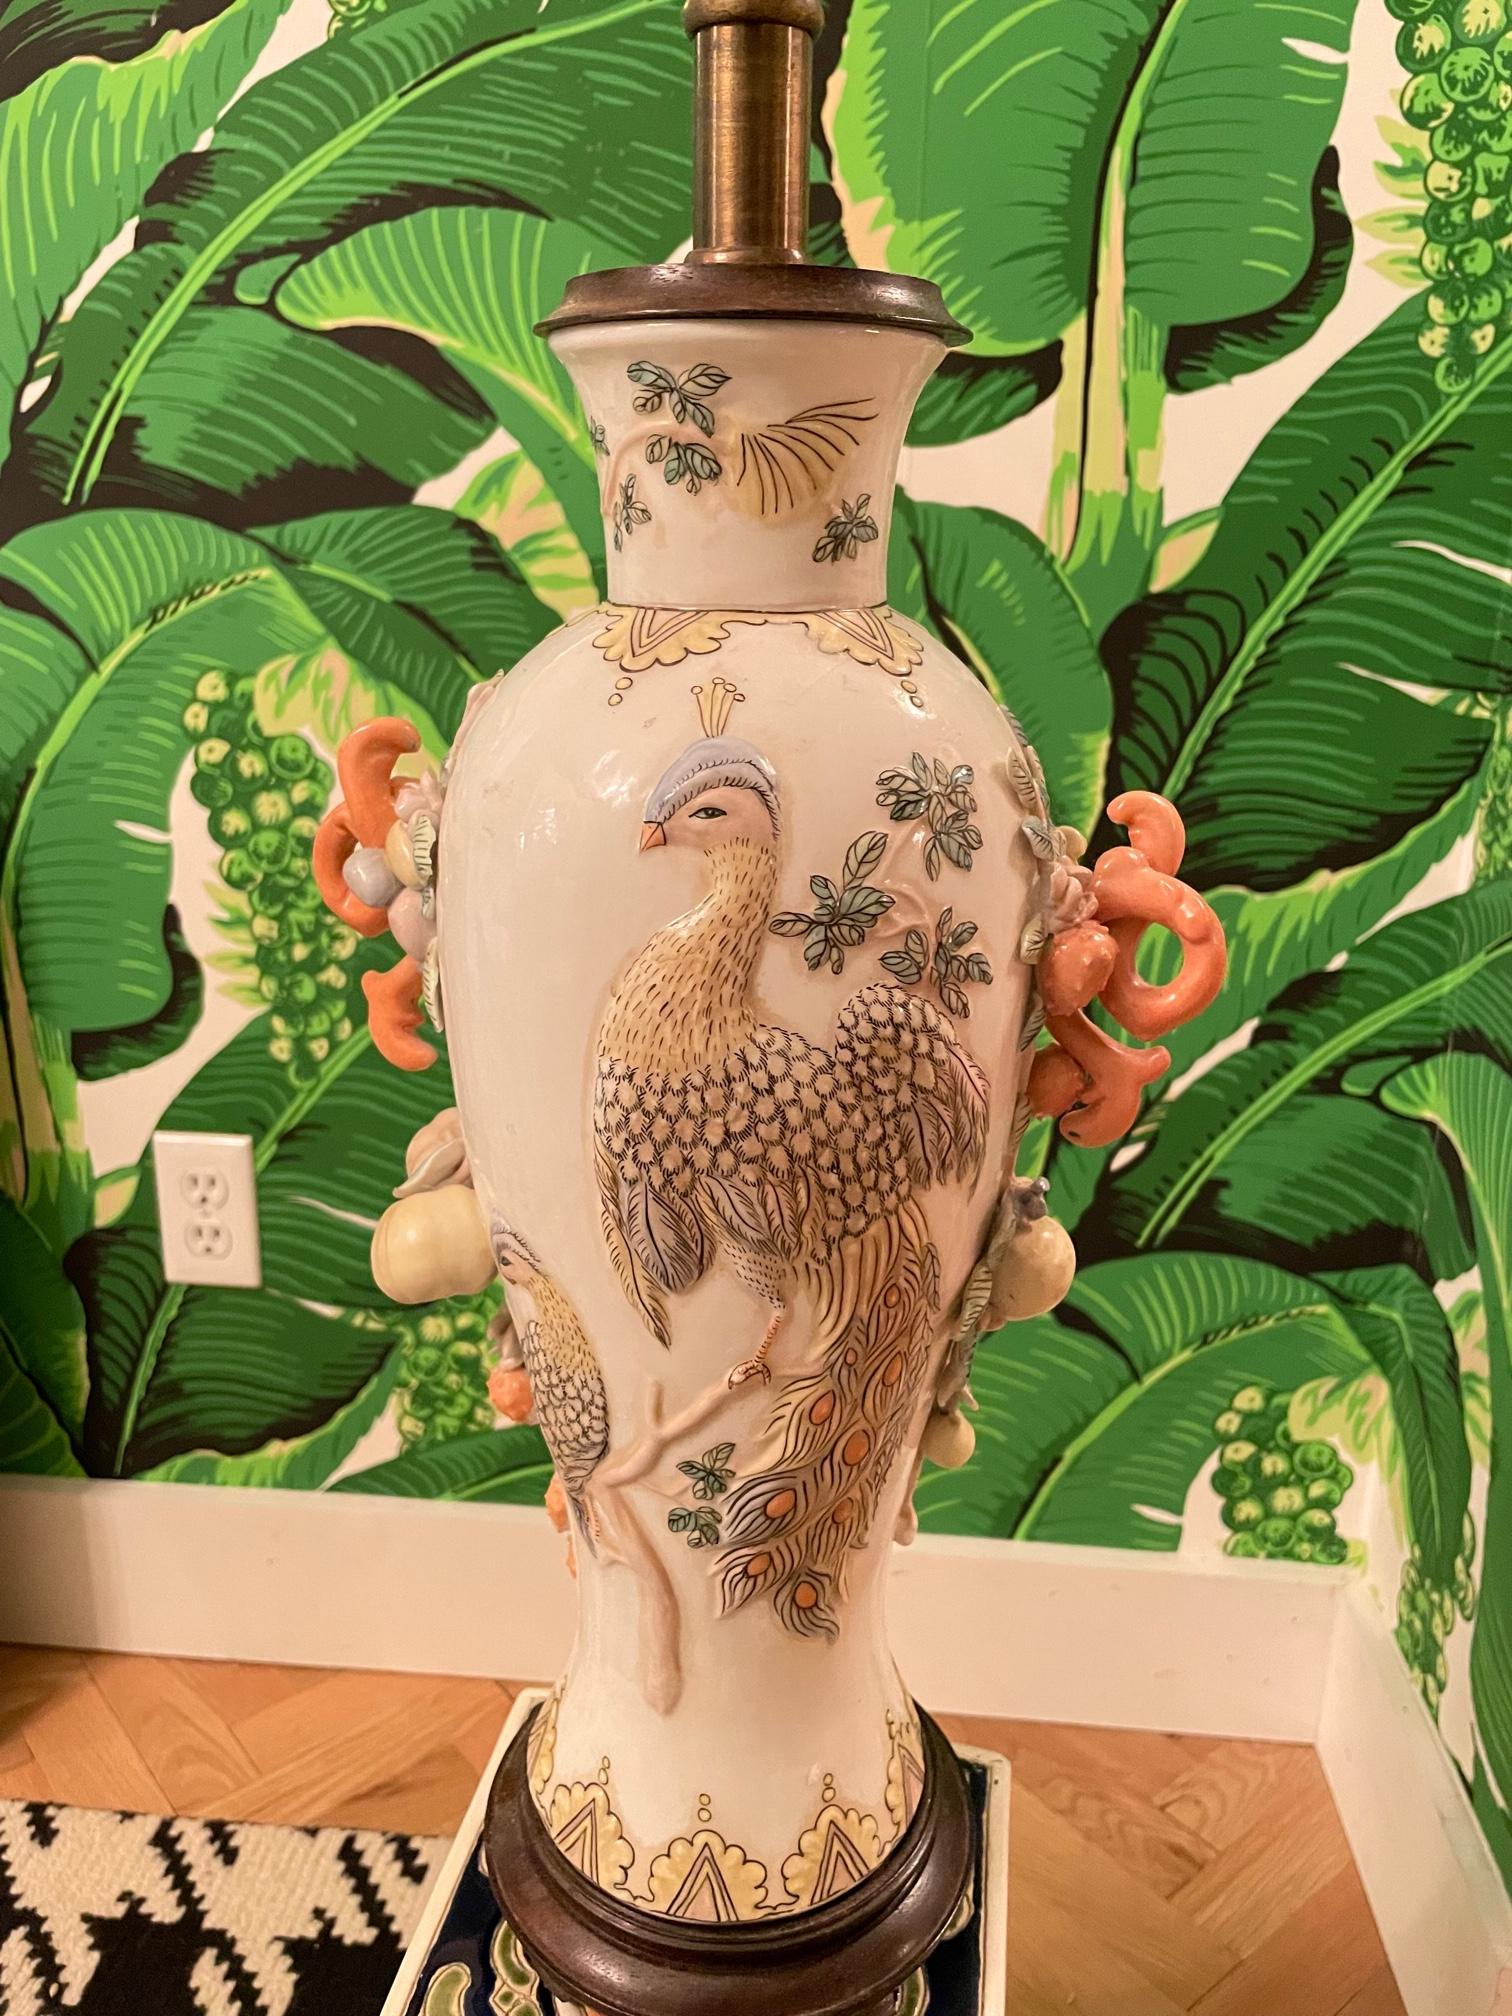 Vintage table lamp by Maitland Smith features a glazed ceramic body and wood pedestal. Adorned with peacocks and vines. Very good condition with only very minor imperfections consistent with age. May exhibit scuffs, marks, or wear, see photos for